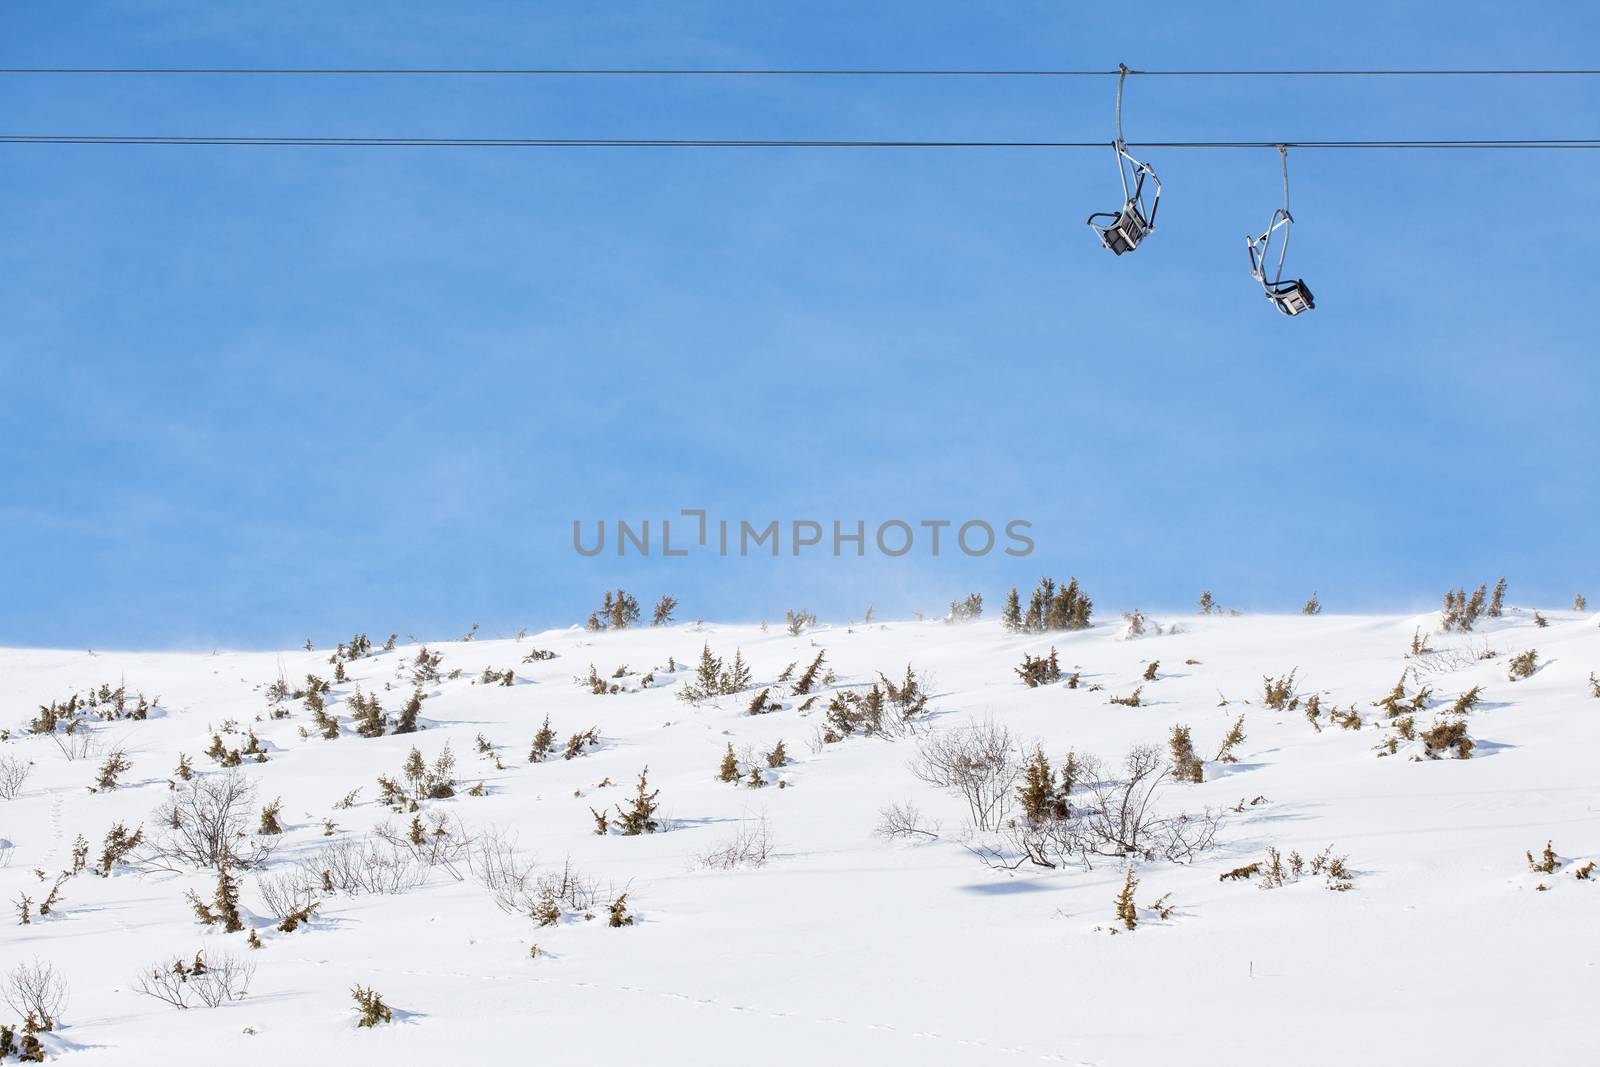 ski chair lift with two double seats, against blue sky, above snowy field